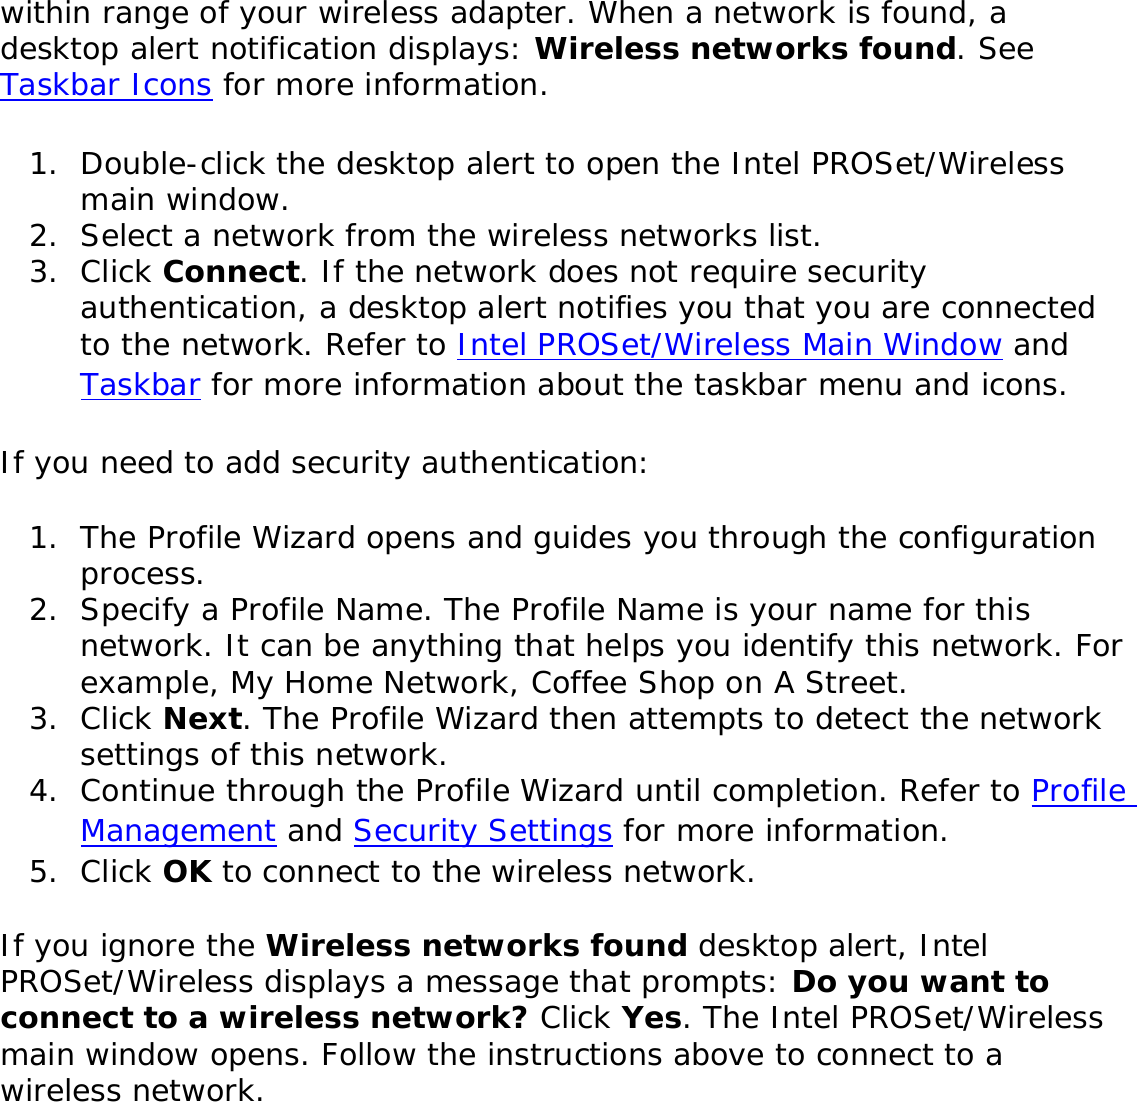 within range of your wireless adapter. When a network is found, a desktop alert notification displays: Wireless networks found. See Taskbar Icons for more information. 1.  Double-click the desktop alert to open the Intel PROSet/Wireless main window. 2.  Select a network from the wireless networks list.3.  Click Connect. If the network does not require security authentication, a desktop alert notifies you that you are connected to the network. Refer to Intel PROSet/Wireless Main Window and Taskbar for more information about the taskbar menu and icons. If you need to add security authentication: 1.  The Profile Wizard opens and guides you through the configuration process. 2.  Specify a Profile Name. The Profile Name is your name for this network. It can be anything that helps you identify this network. For example, My Home Network, Coffee Shop on A Street. 3.  Click Next. The Profile Wizard then attempts to detect the network settings of this network. 4.  Continue through the Profile Wizard until completion. Refer to Profile Management and Security Settings for more information. 5.  Click OK to connect to the wireless network. If you ignore the Wireless networks found desktop alert, Intel PROSet/Wireless displays a message that prompts: Do you want to connect to a wireless network? Click Yes. The Intel PROSet/Wireless main window opens. Follow the instructions above to connect to a wireless network. 